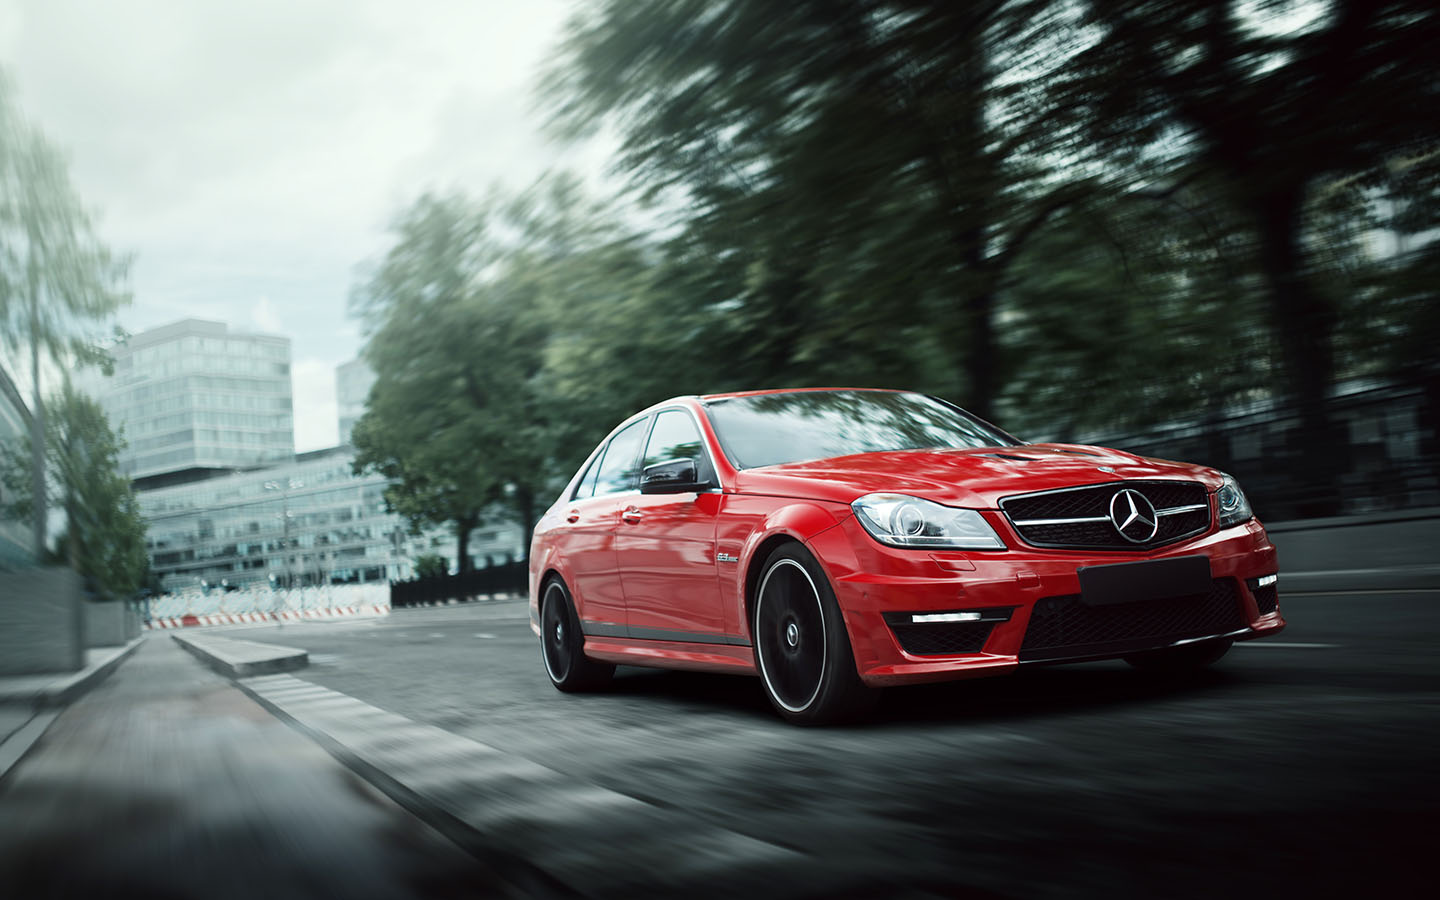 enhance ride safety with mercedes safety features